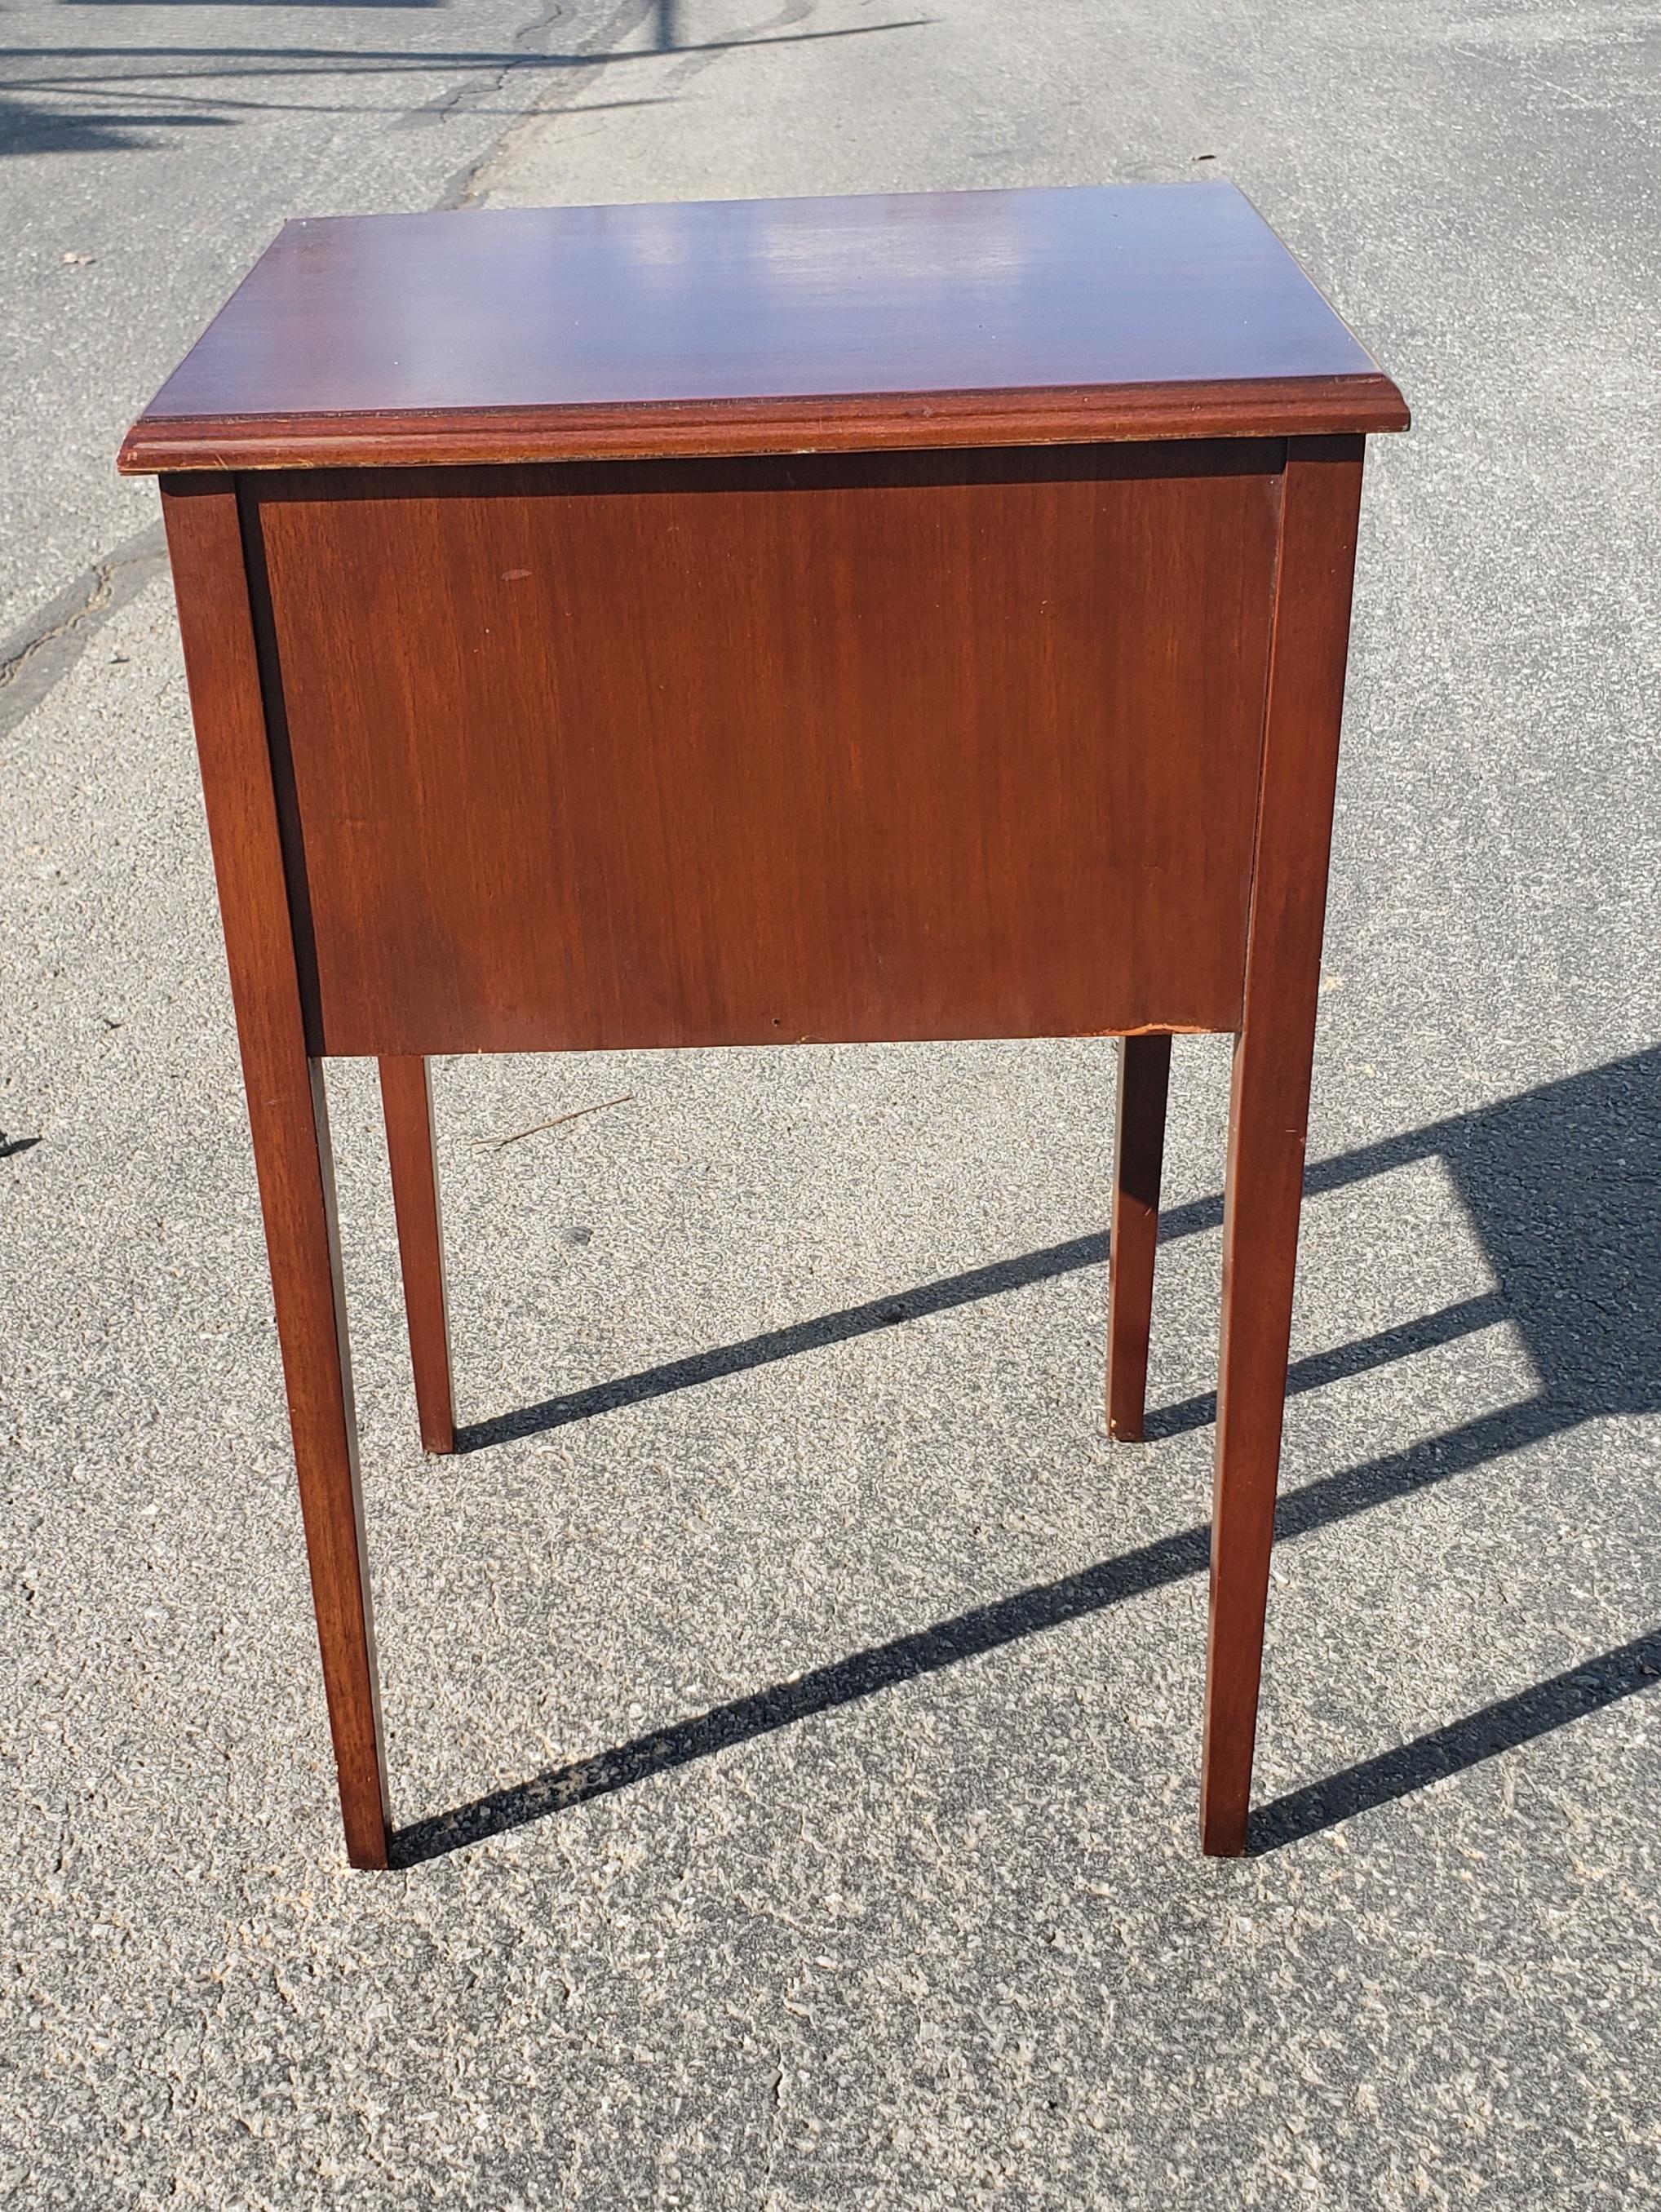 1940s Regency Two-Drawers Mahogany Side Tables by Mersman Furniture, a Pair For Sale 1